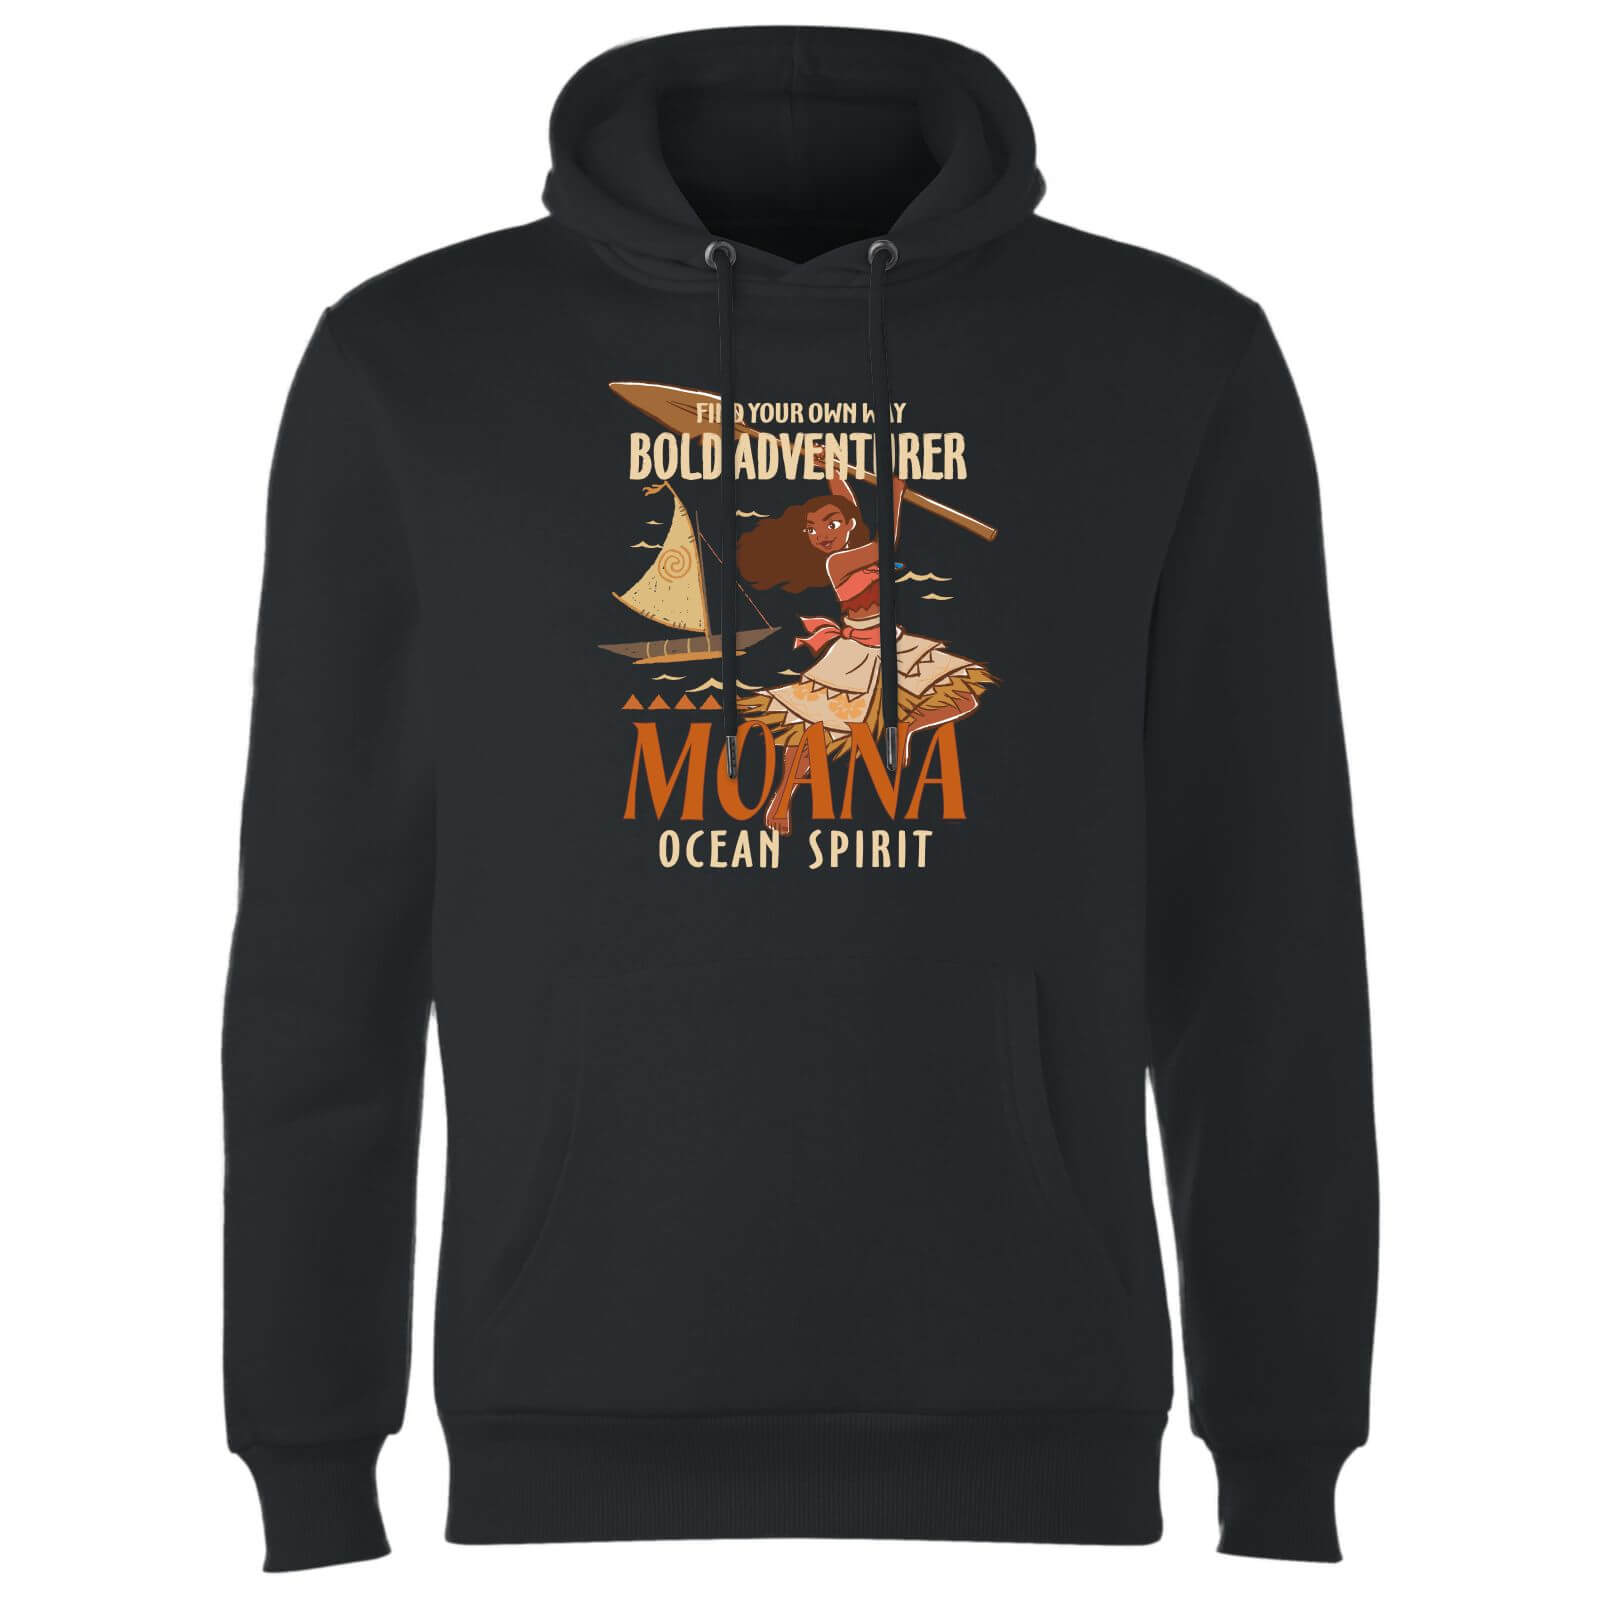 Moana Find Your Own Way Hoodie - Black - S